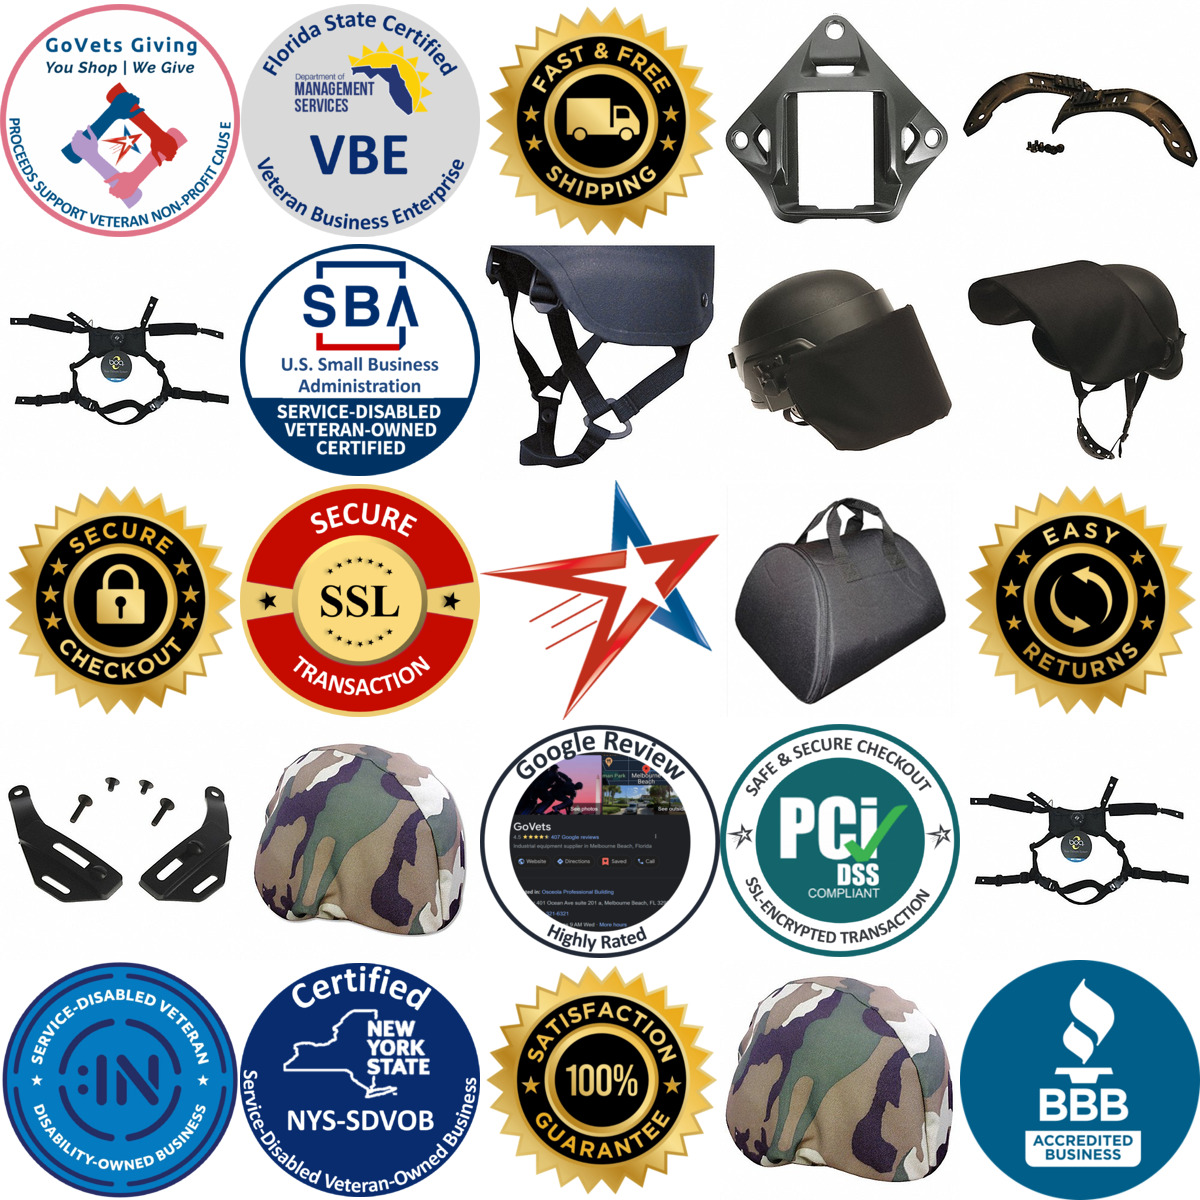 A selection of Ballistic Helmet Accessories products on GoVets